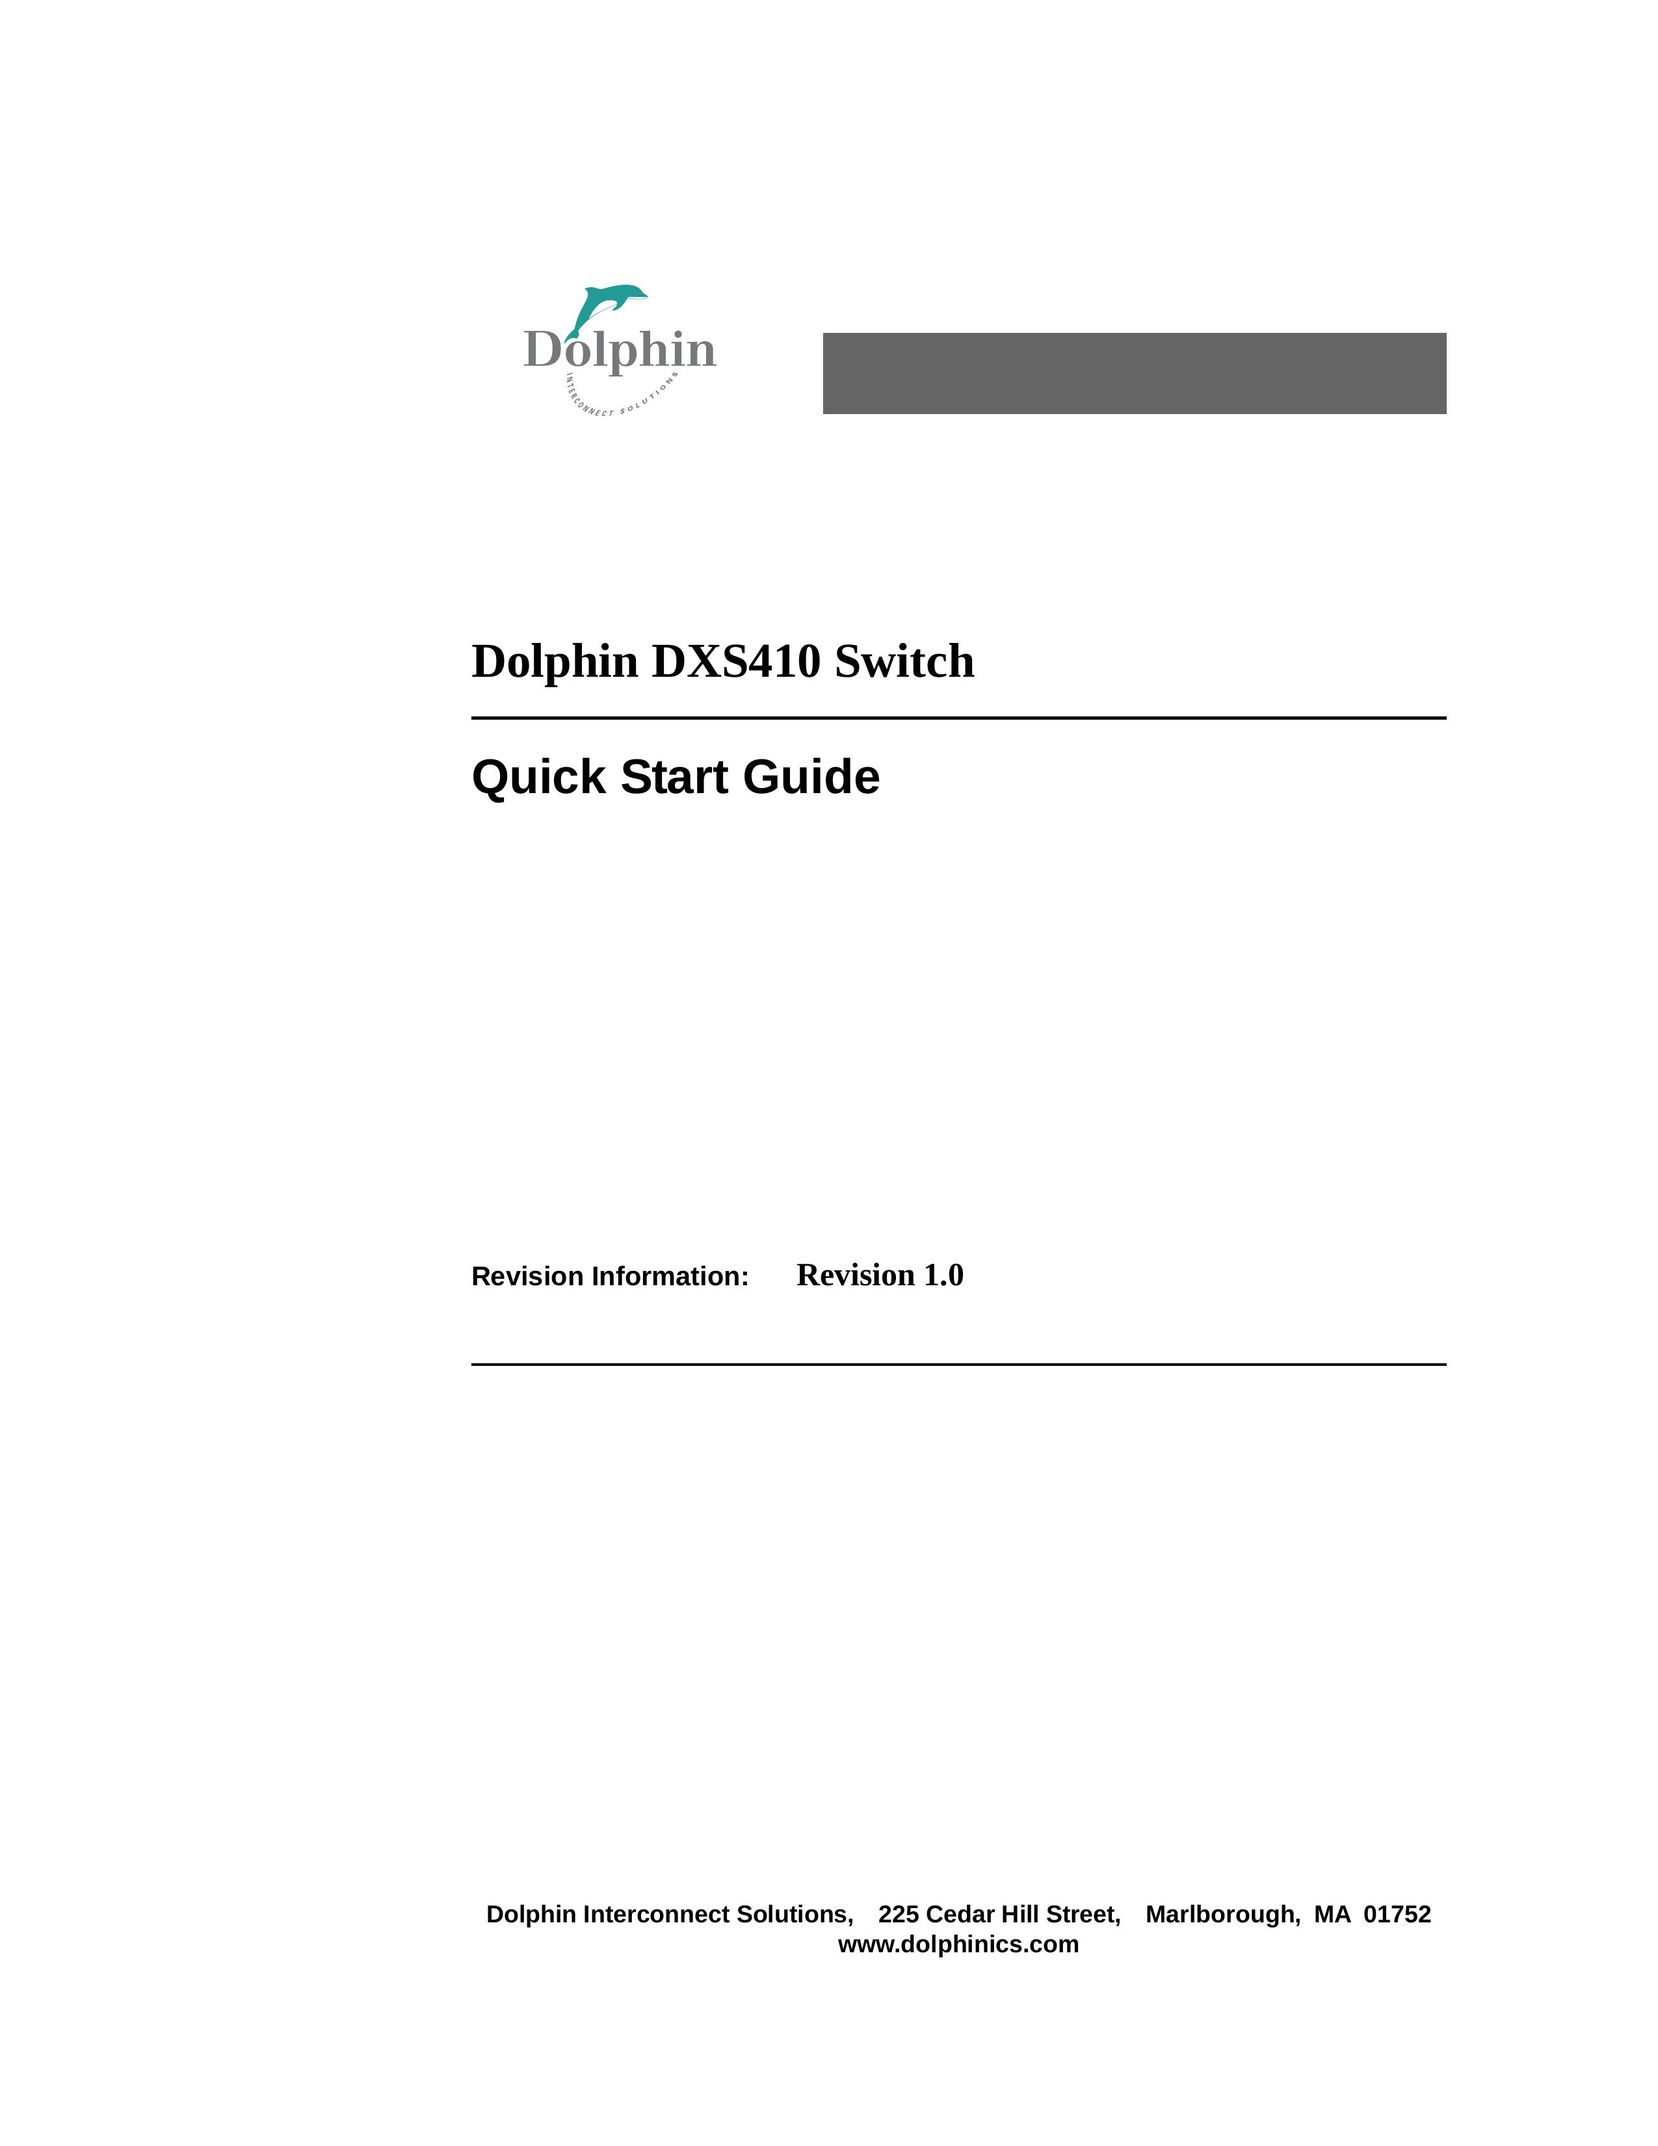 Dolphin Peripherals DXS410 Switch User Manual